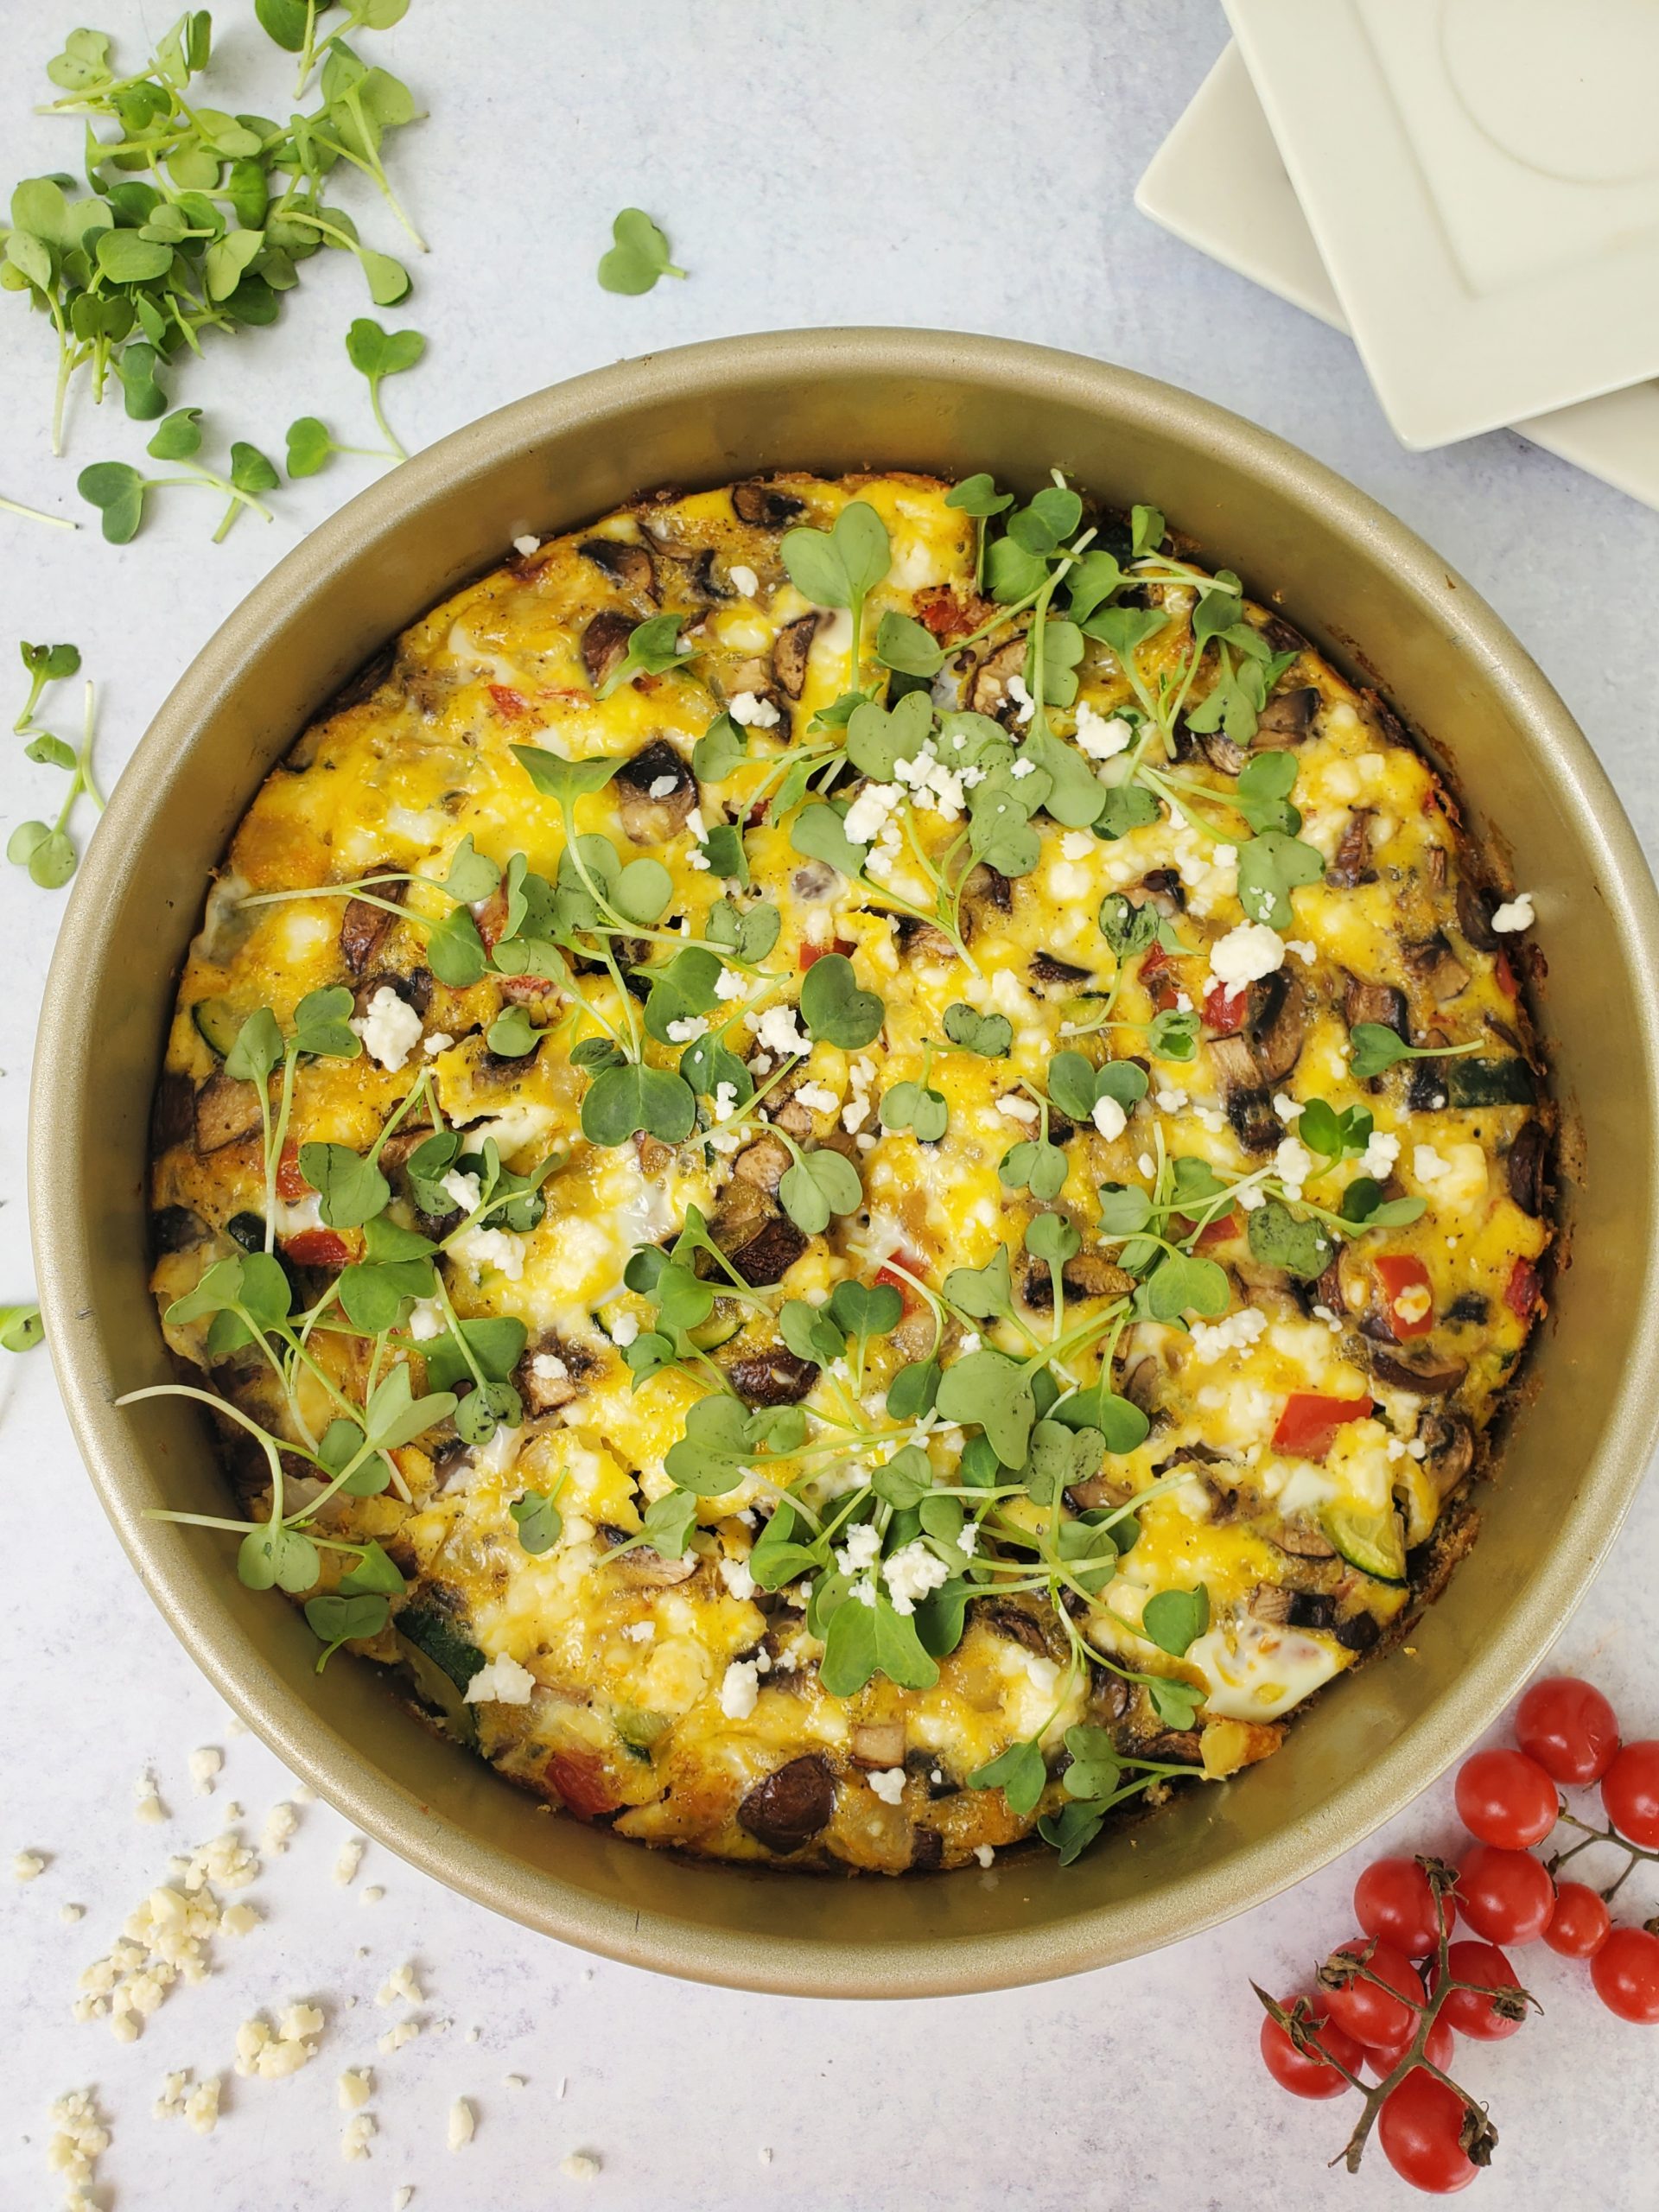 Vegetable Frittata with sprouts on top